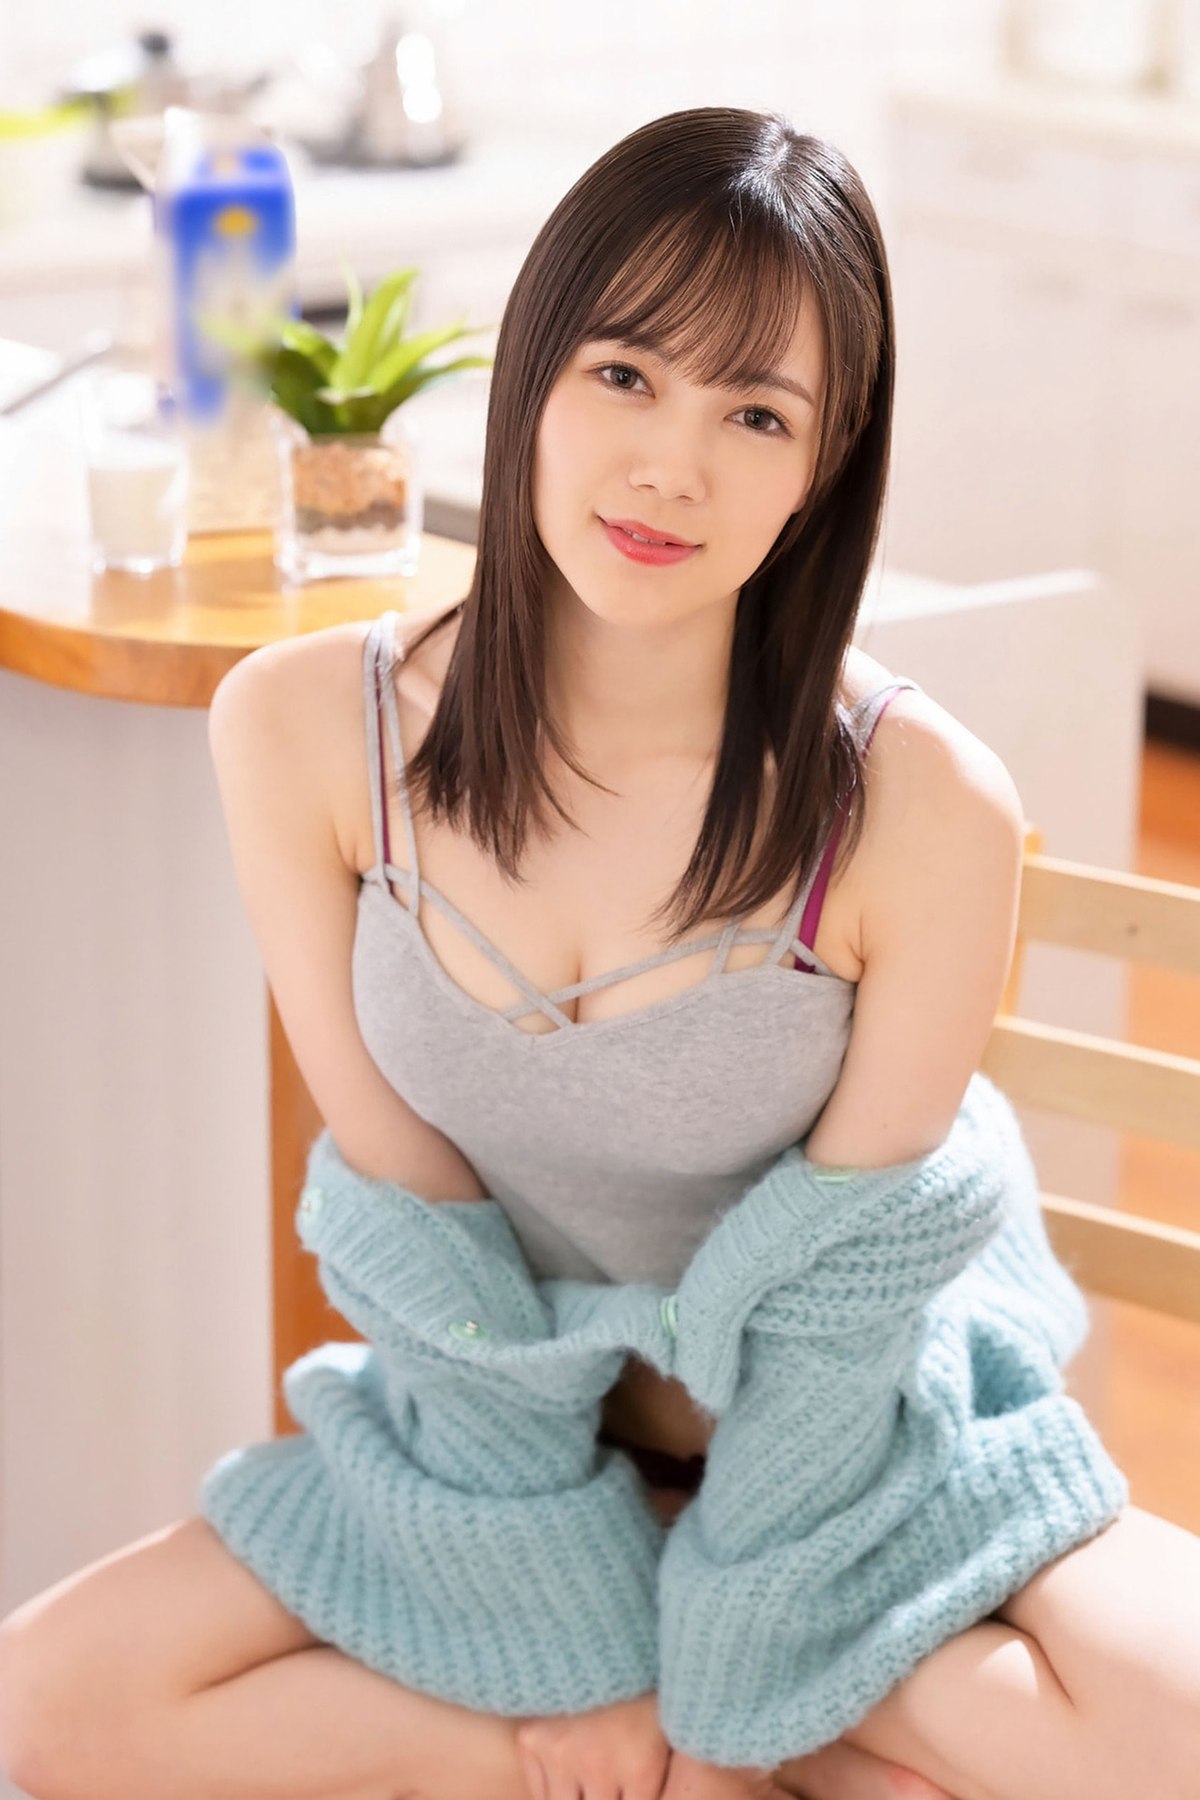 Photobook Remu Suzumori 涼森れむ Ejaculates And Lives Together A 0037 9656831848.jpg